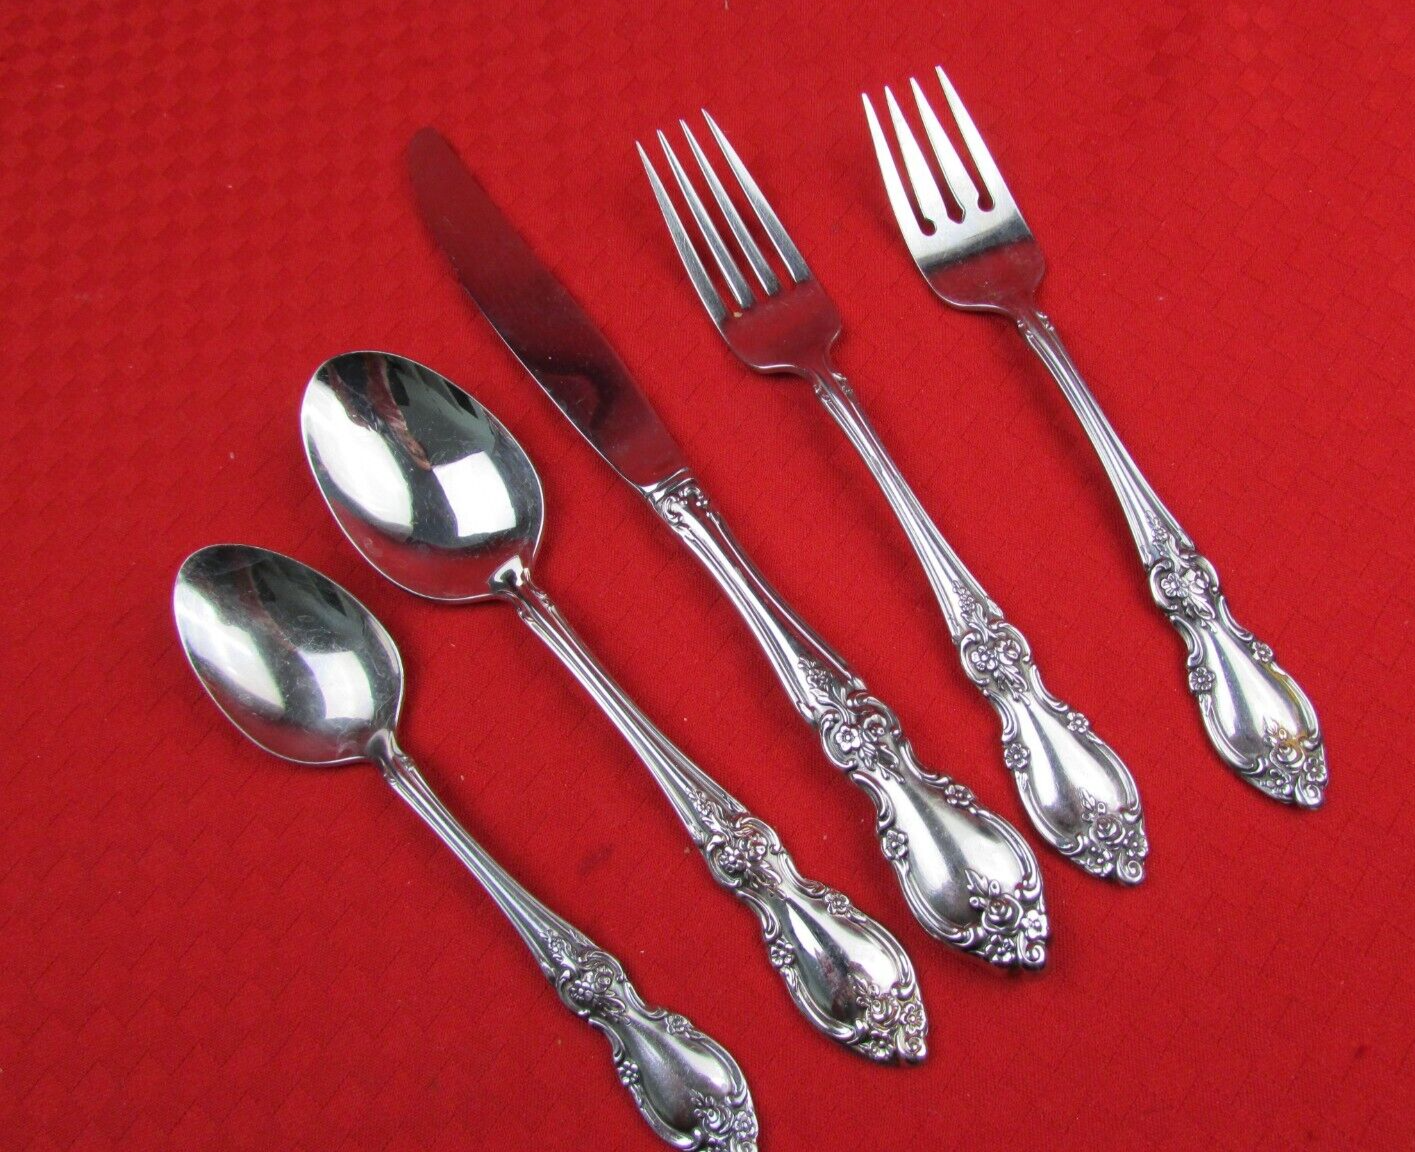 Primary image for CHOICE Oneida Community stainless flatware LOUSIANA pattern CHOICE PIECES